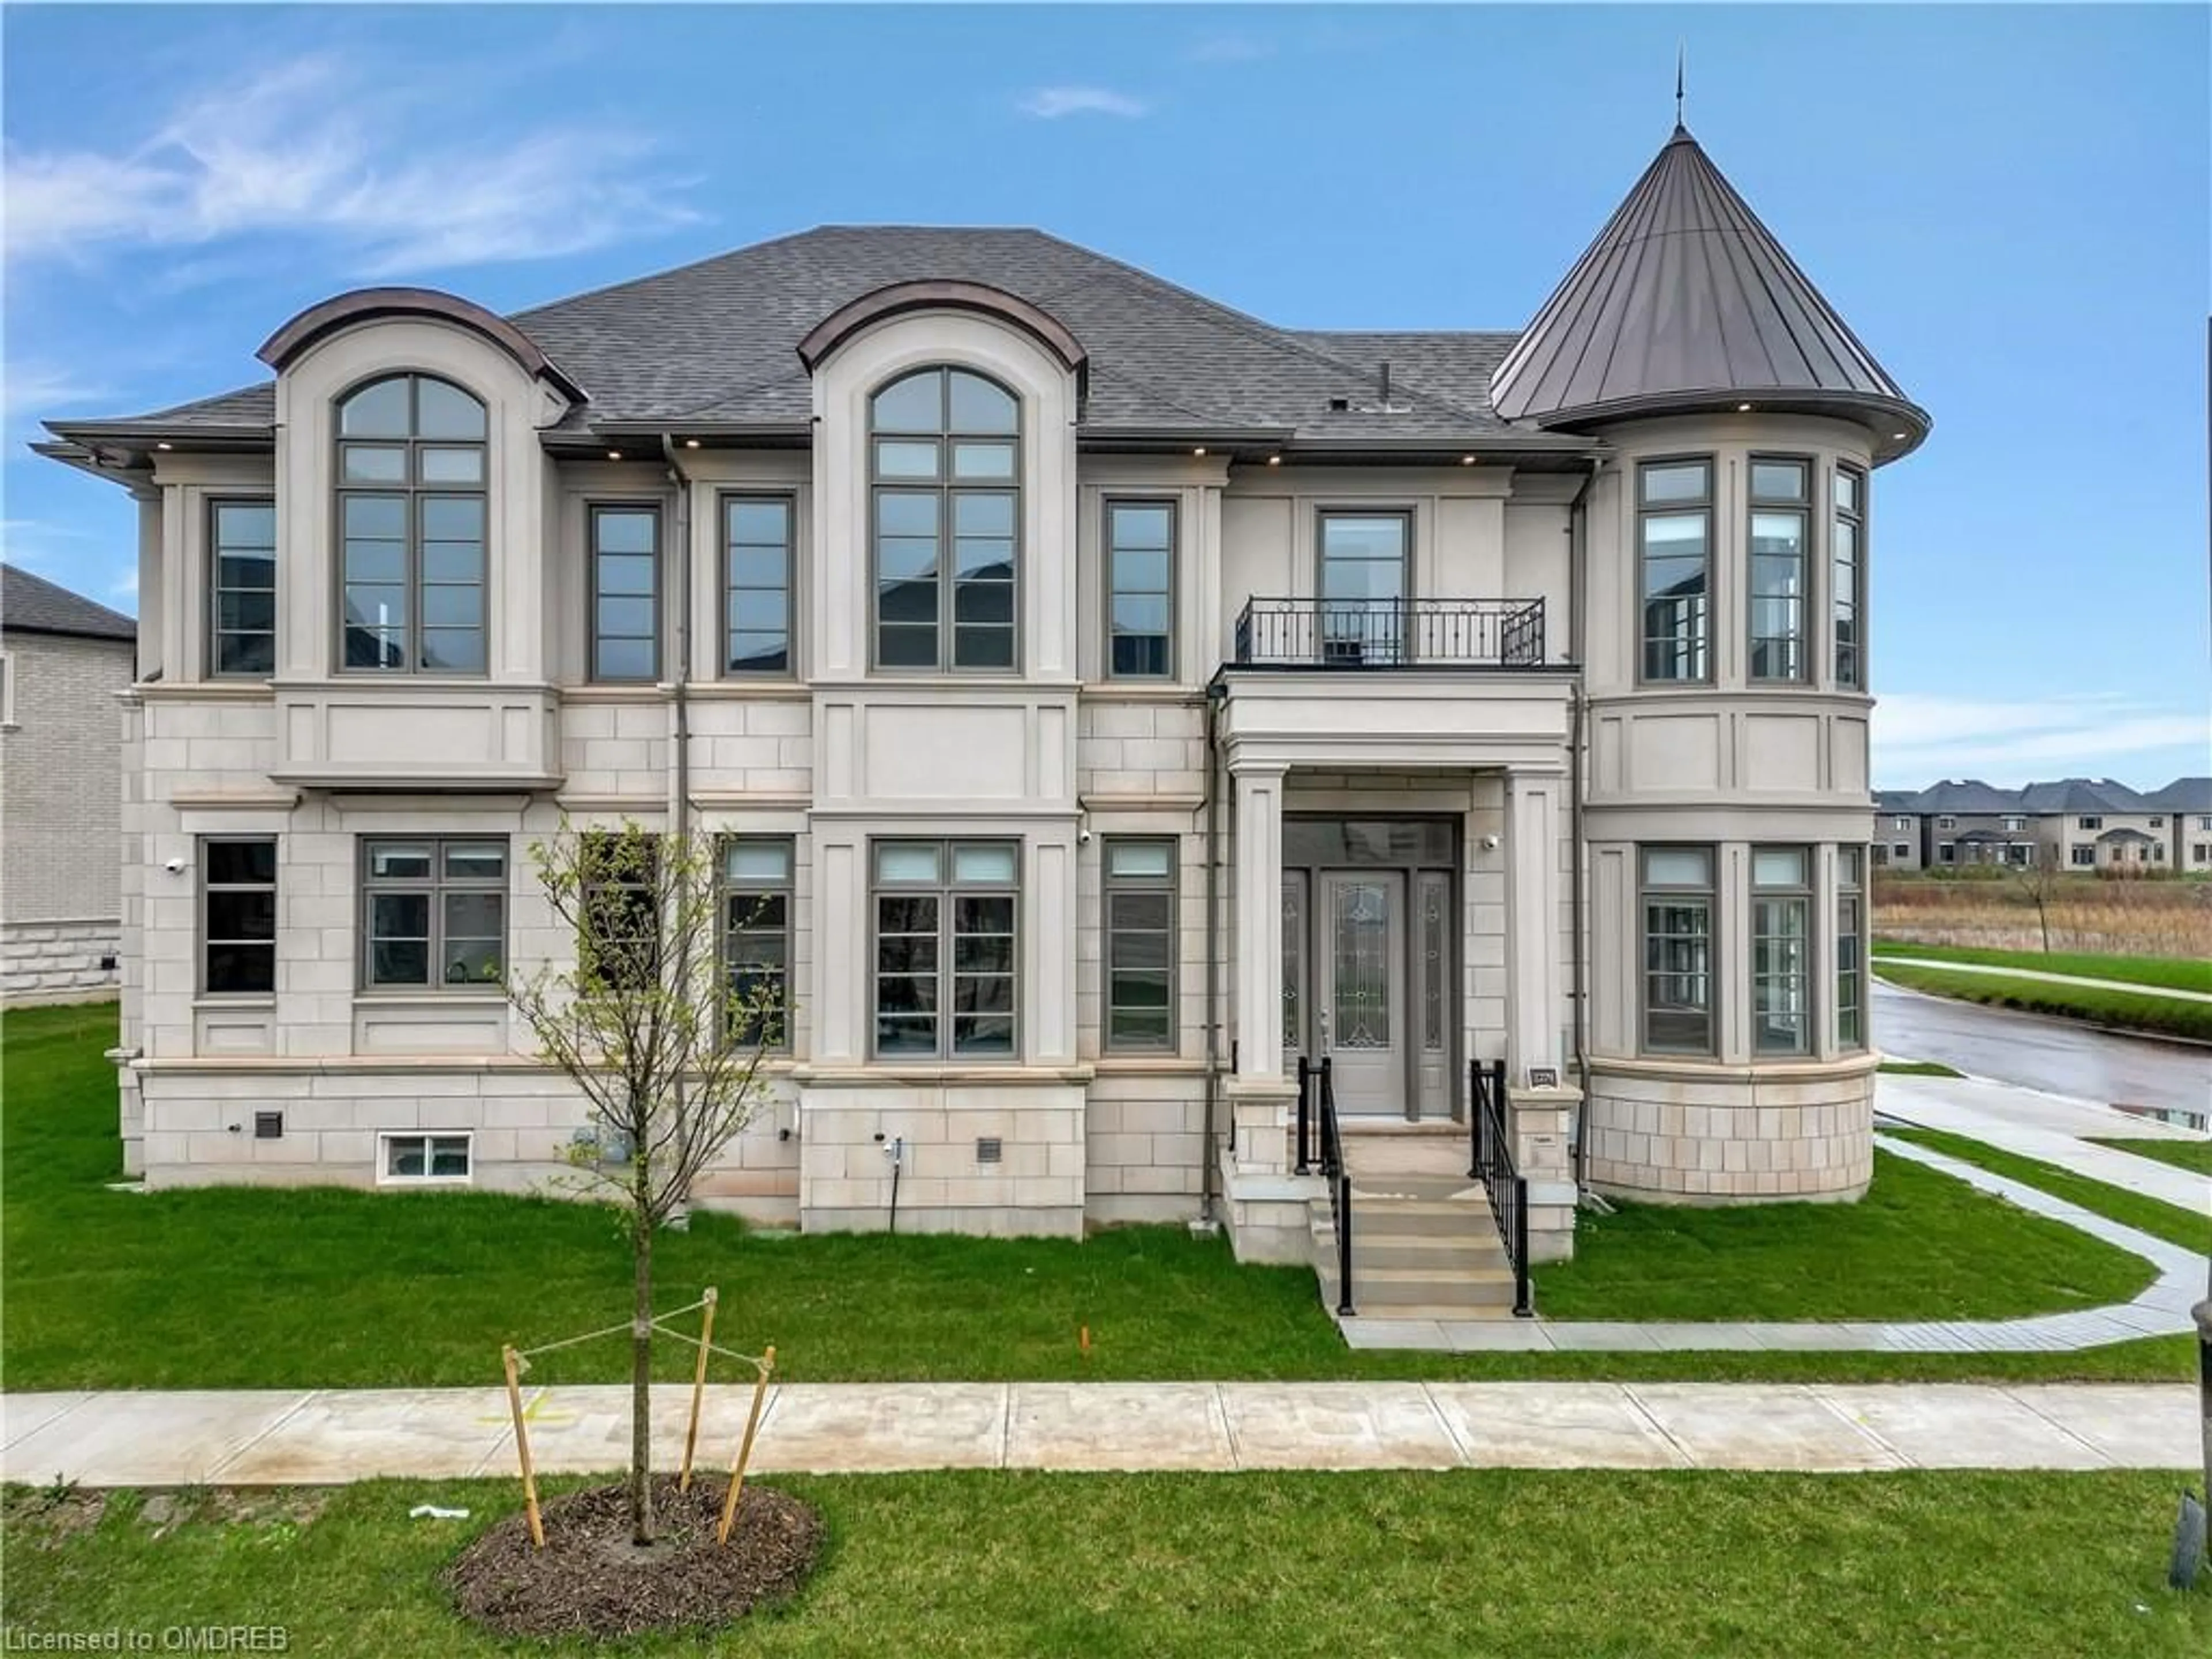 Home with brick exterior material for 2279 Hyacinth Crescent Cres, Oakville Ontario L6M 5M9